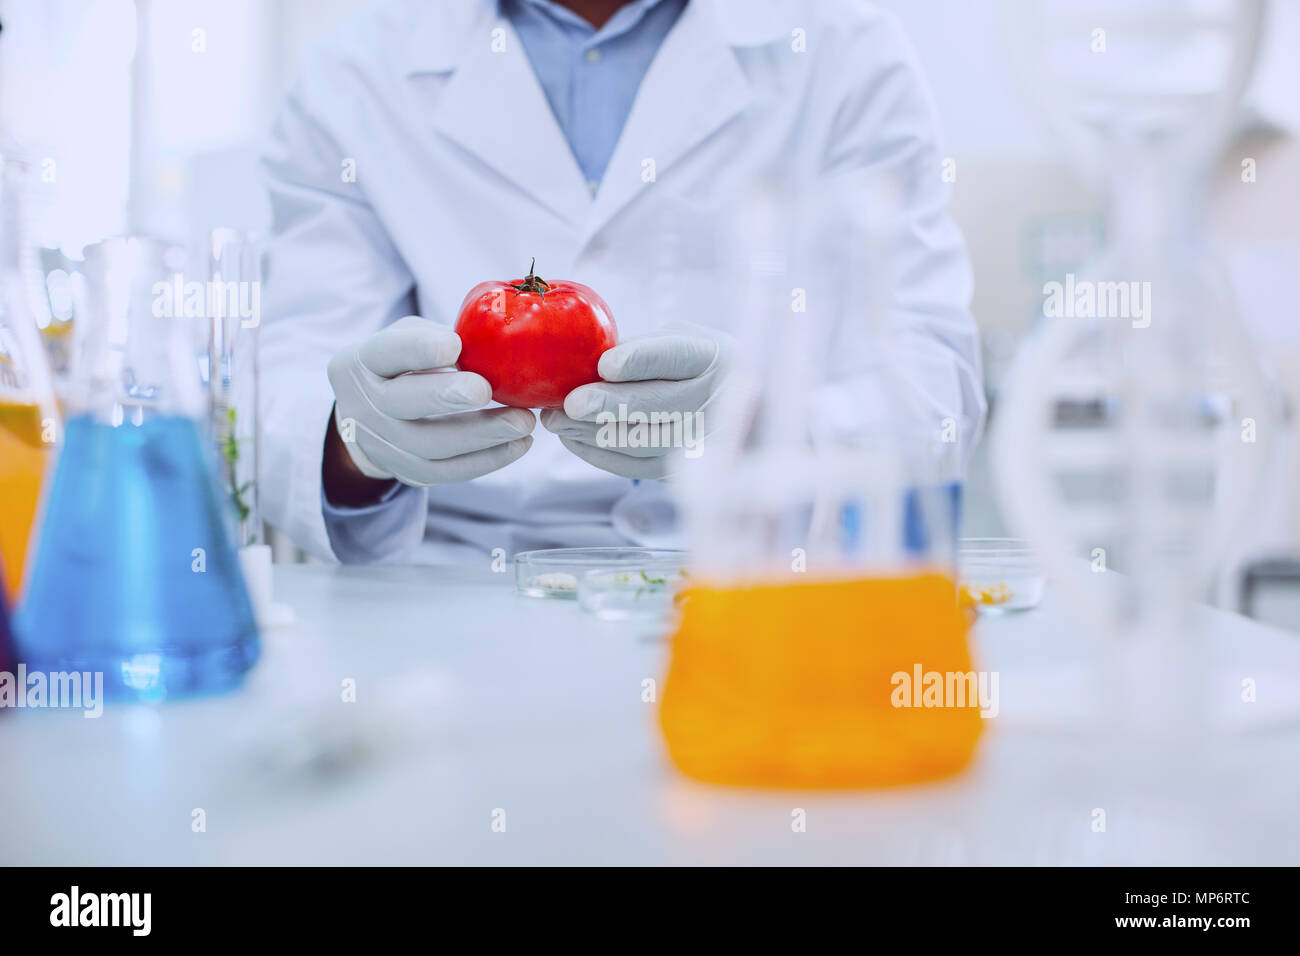 Experienced knowledgeable scientist testing tomatoes Stock Photo